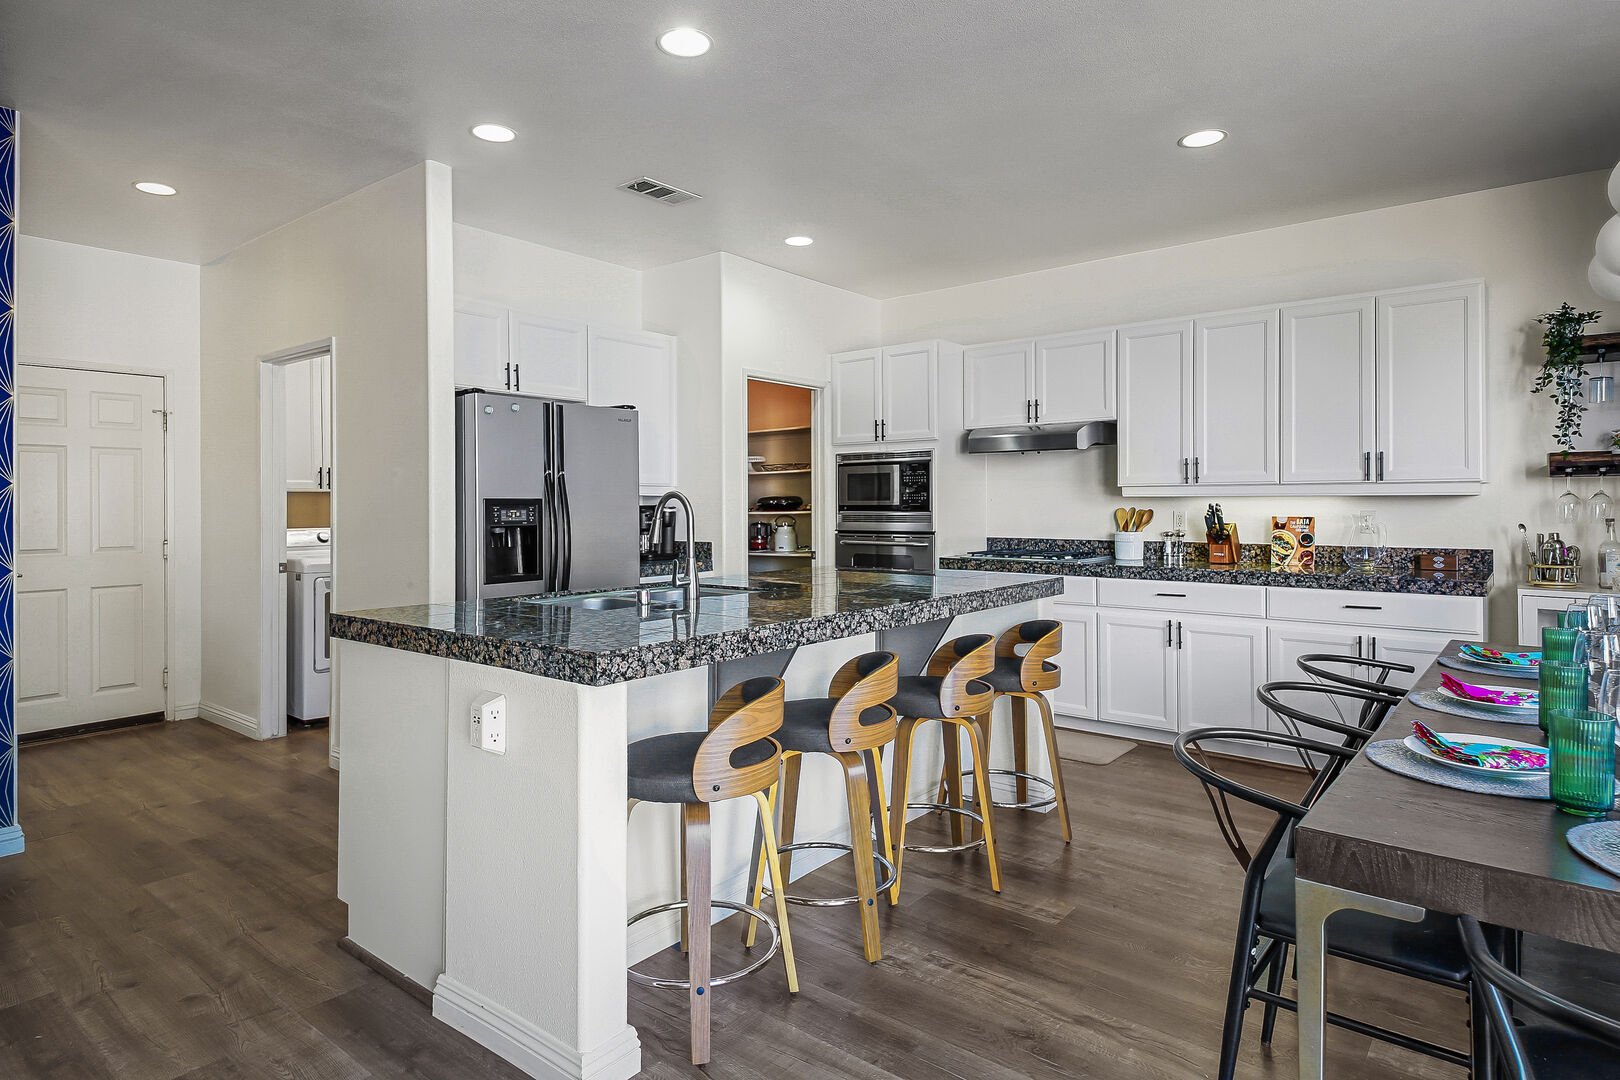 The fully-equipped kitchen features stunning stainless steel appliances.